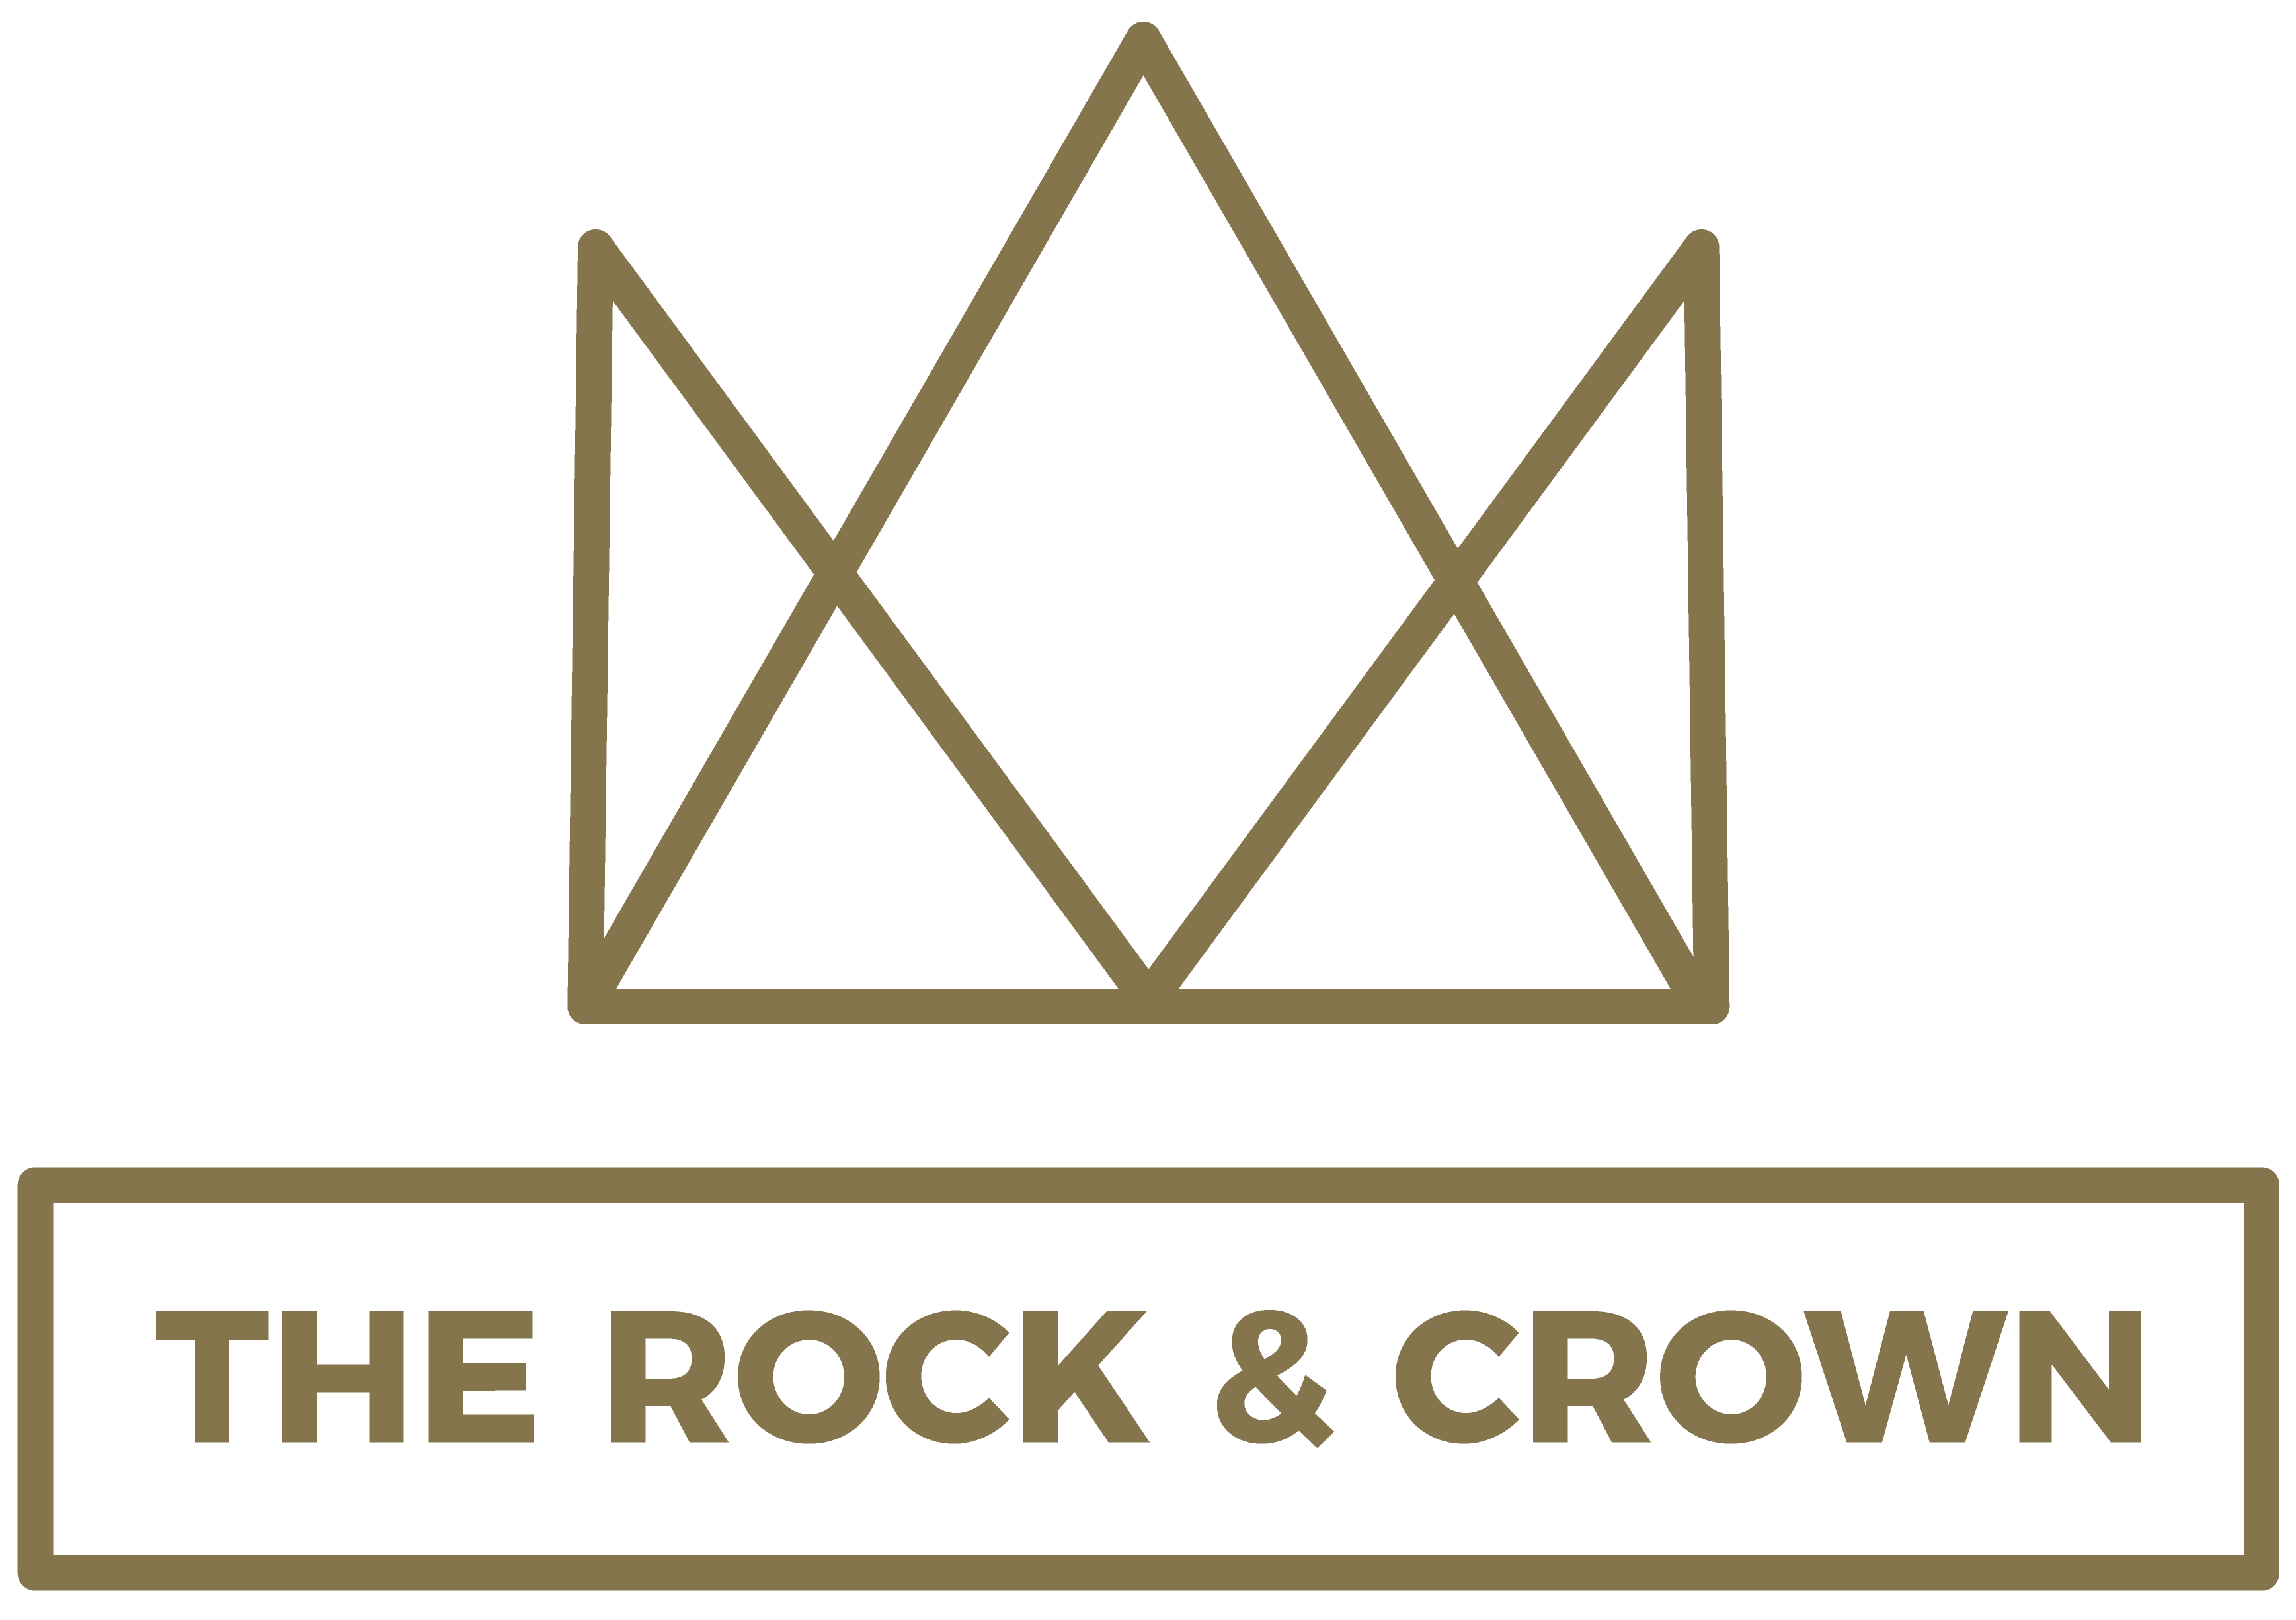 The Rock & Crown